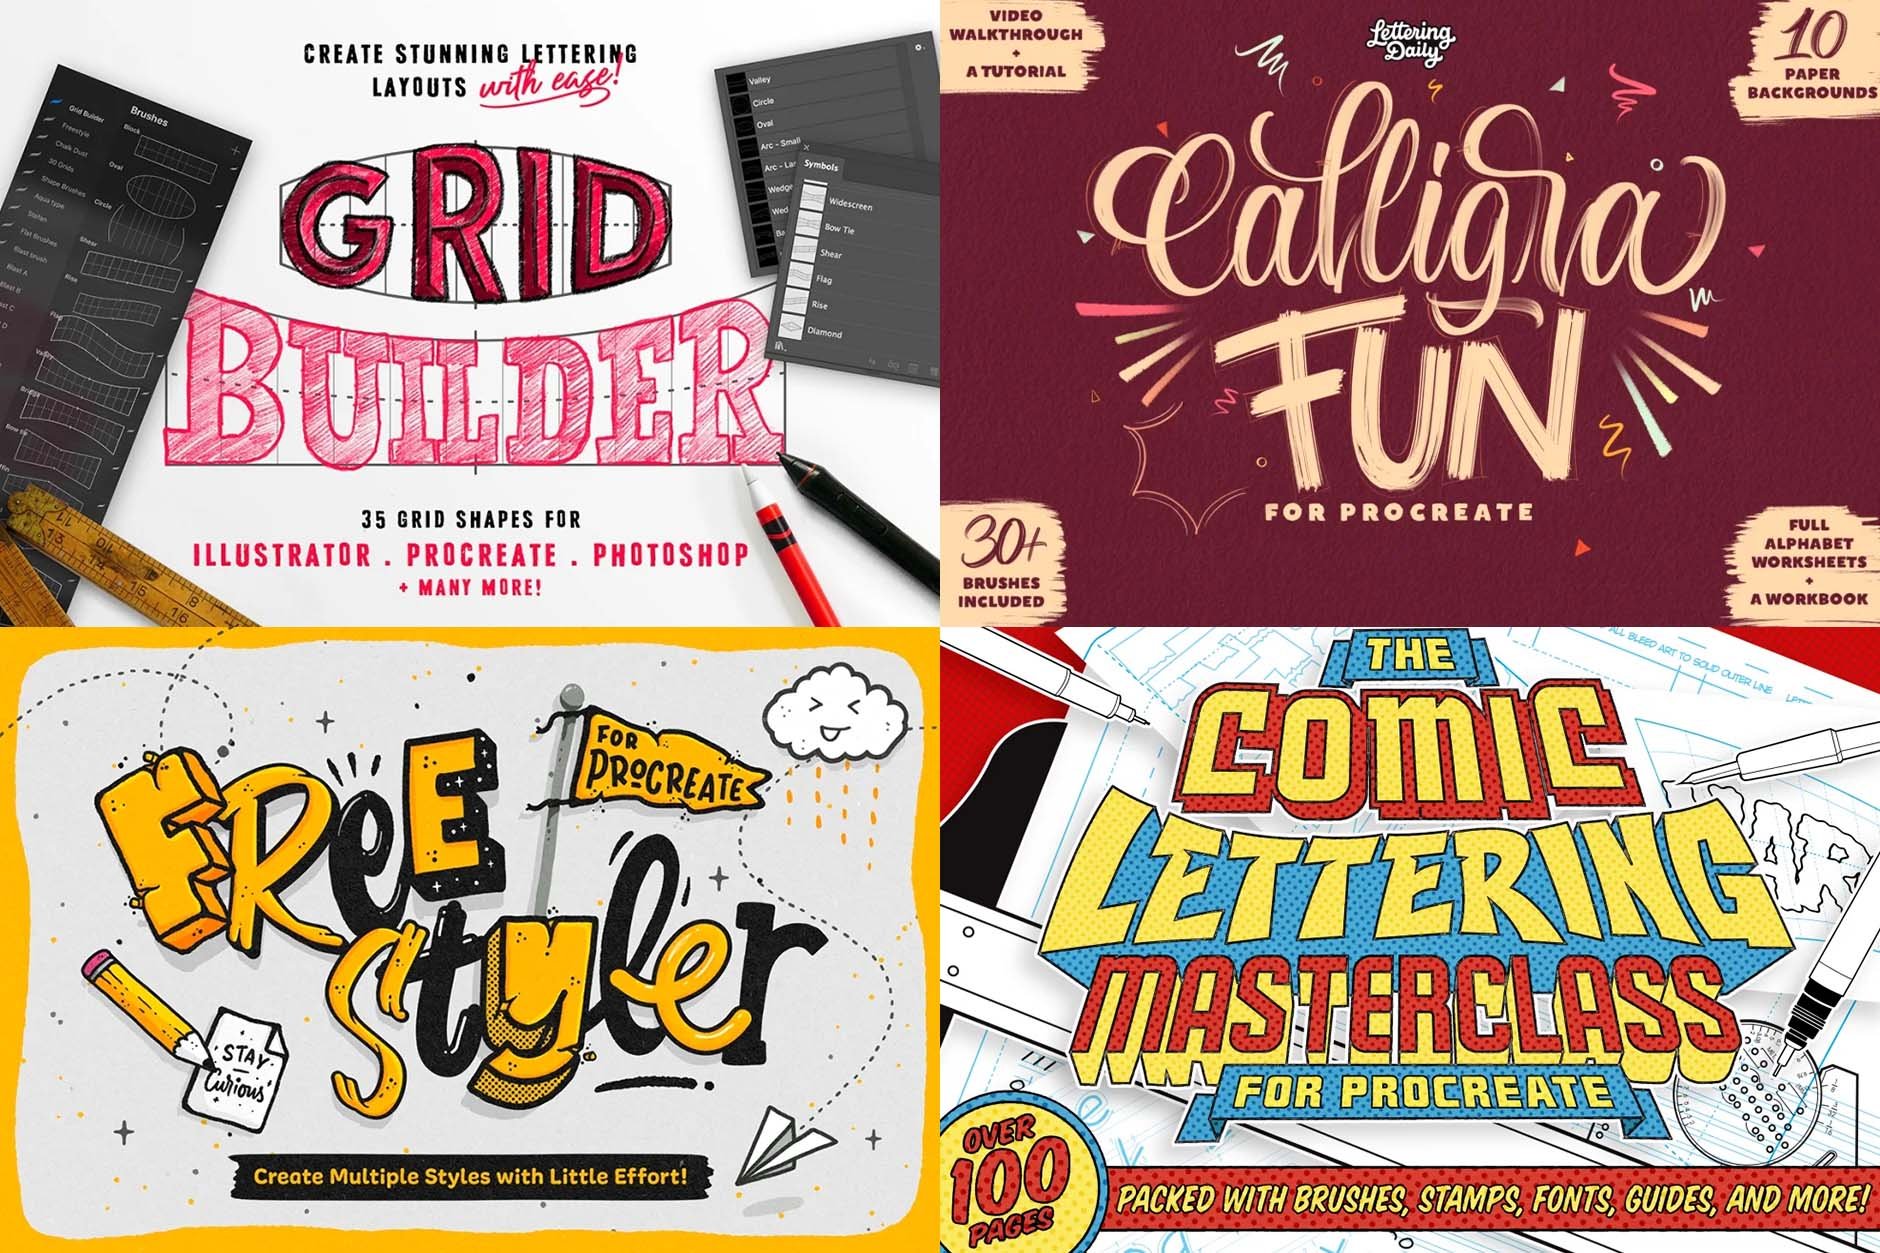 Basics of Hand Lettering: Create Beautiful Lettering with Brush Pens, Shannon Layne